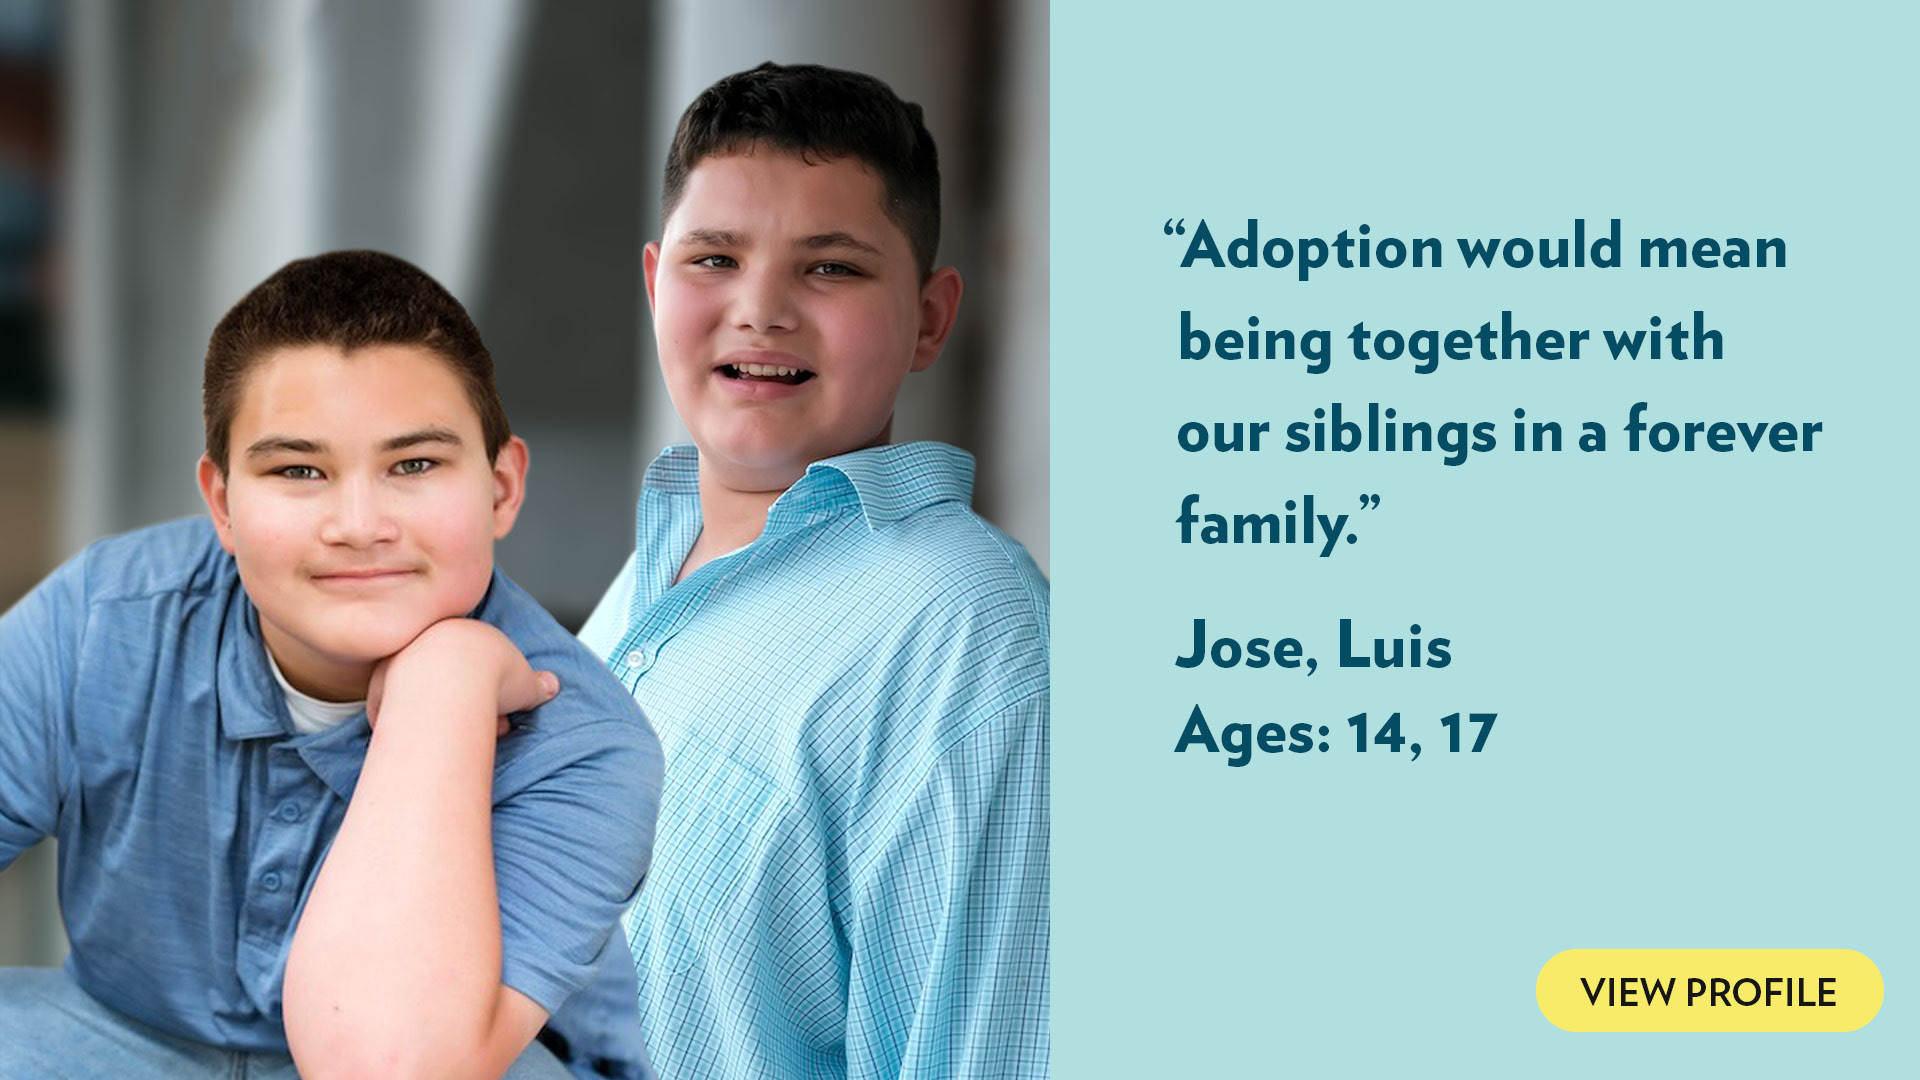 Adoption would mean being together with our siblings in a forever family. Jose, Luis, ages 14, 17. View profile.